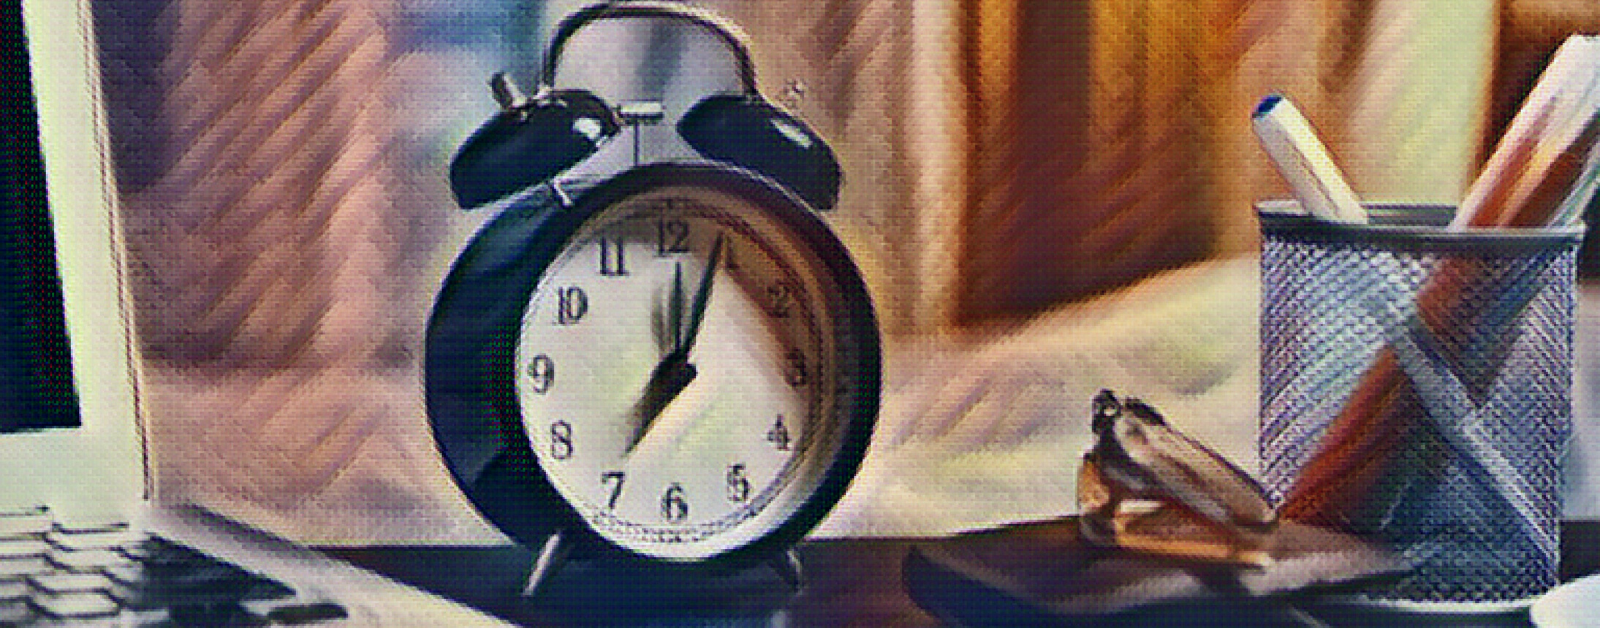 painted filter over a photo of an alarm clock on a desk next to a laptop